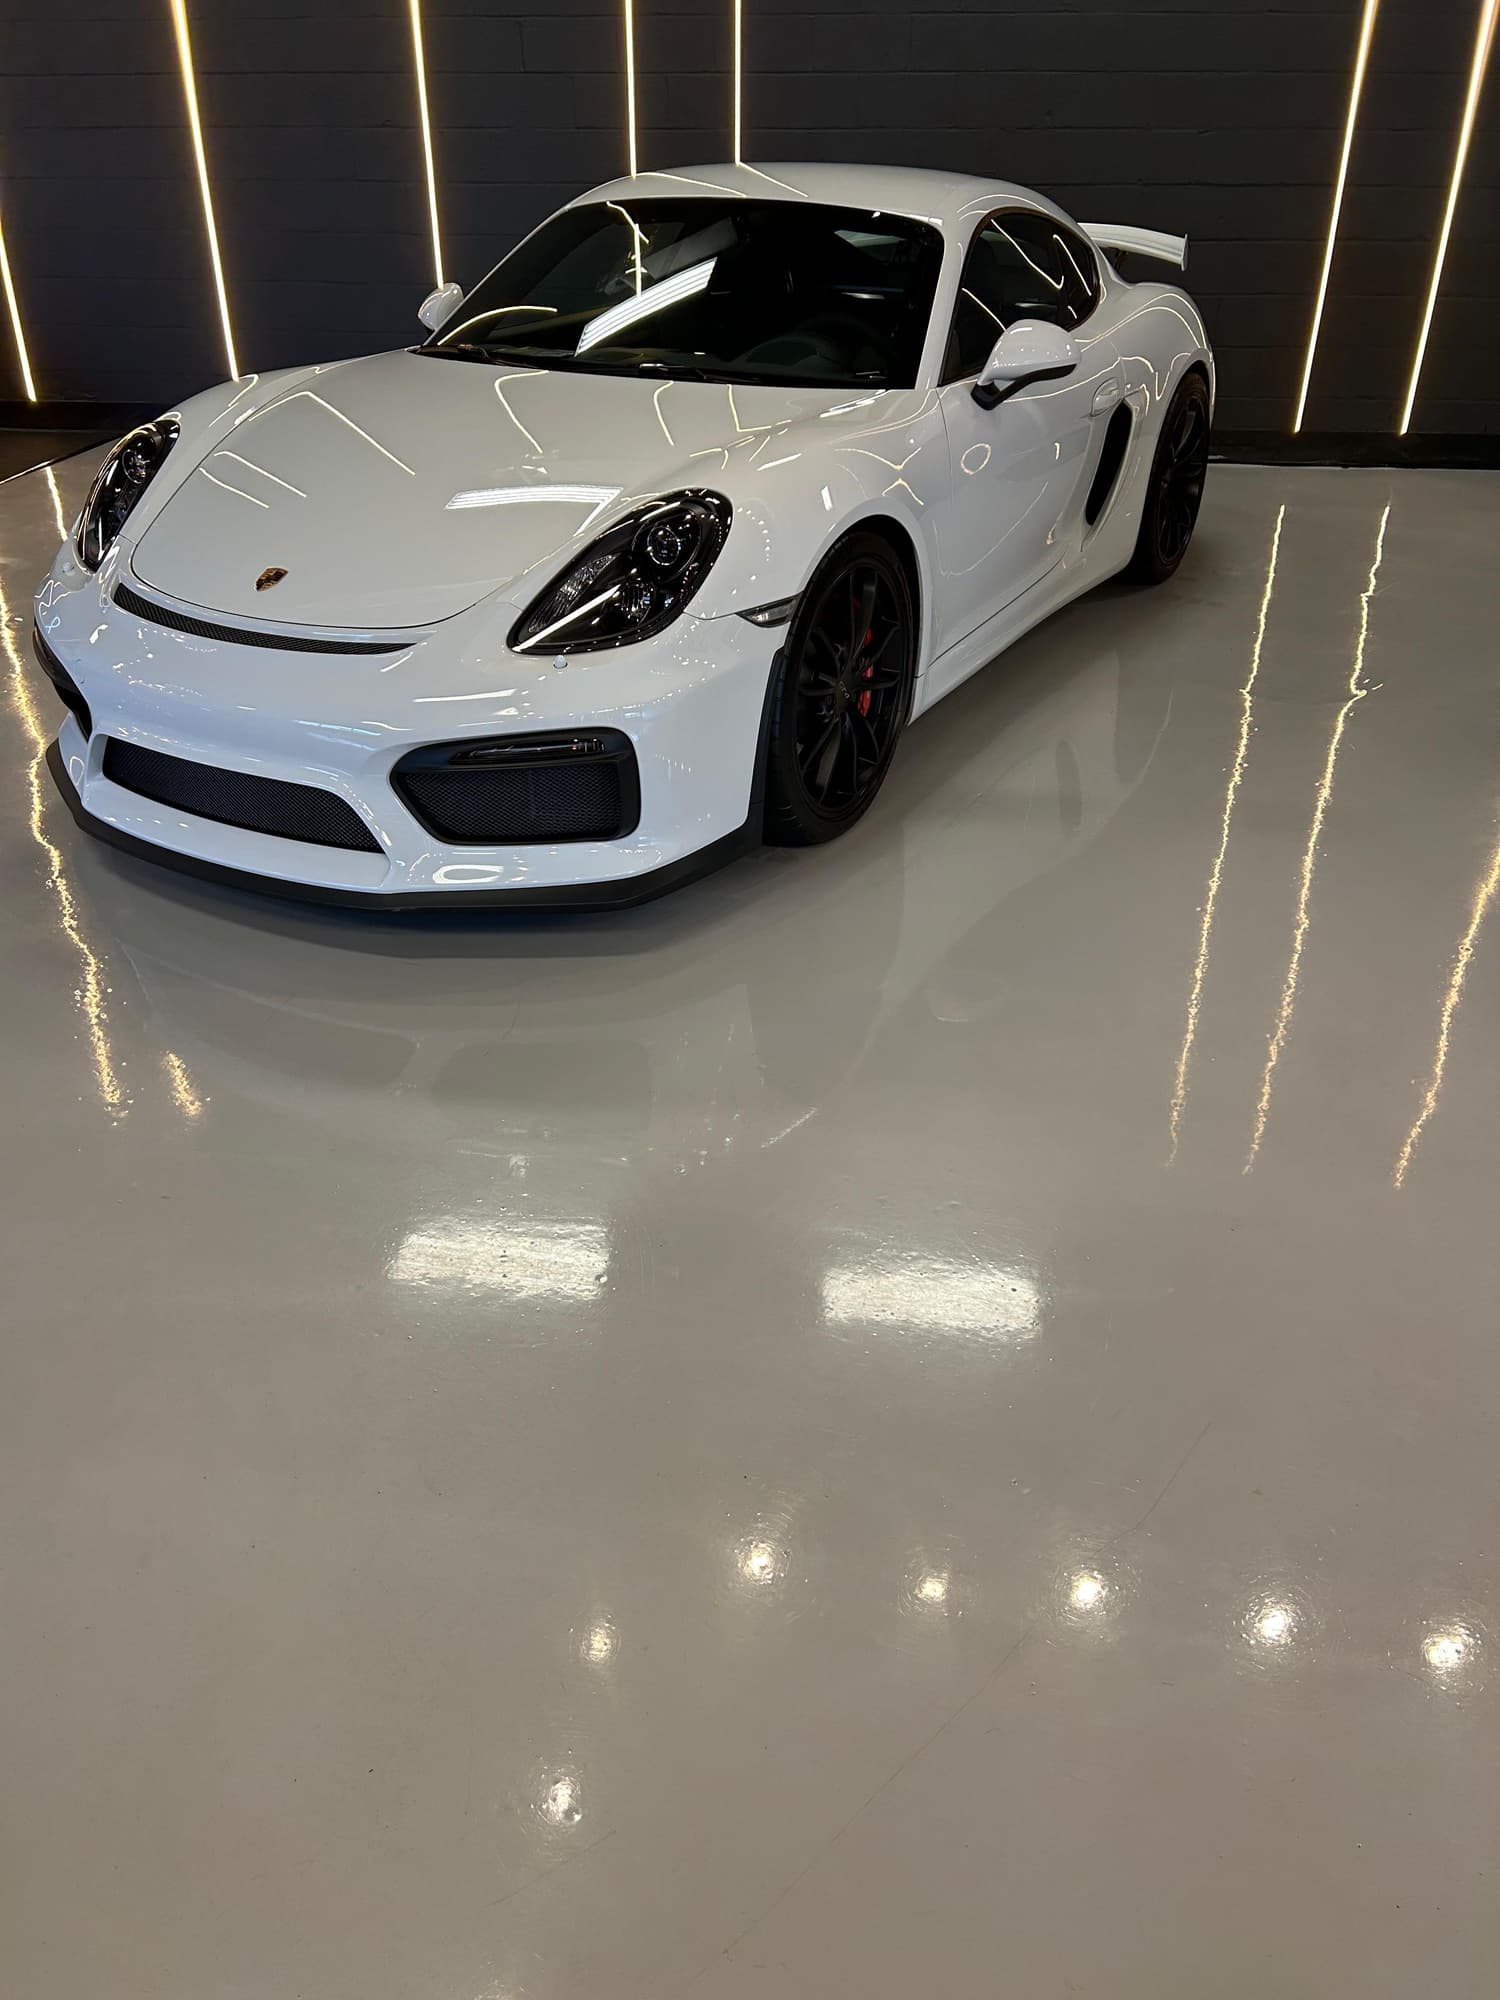 2016 Porsche Cayman GT4 - 981 GT4 w buckets and long-term ownership - Used - VIN WP0AC2A81GK197156 - 19,000 Miles - 6 cyl - 2WD - Manual - Coupe - White - Boston, MA 02155, United States